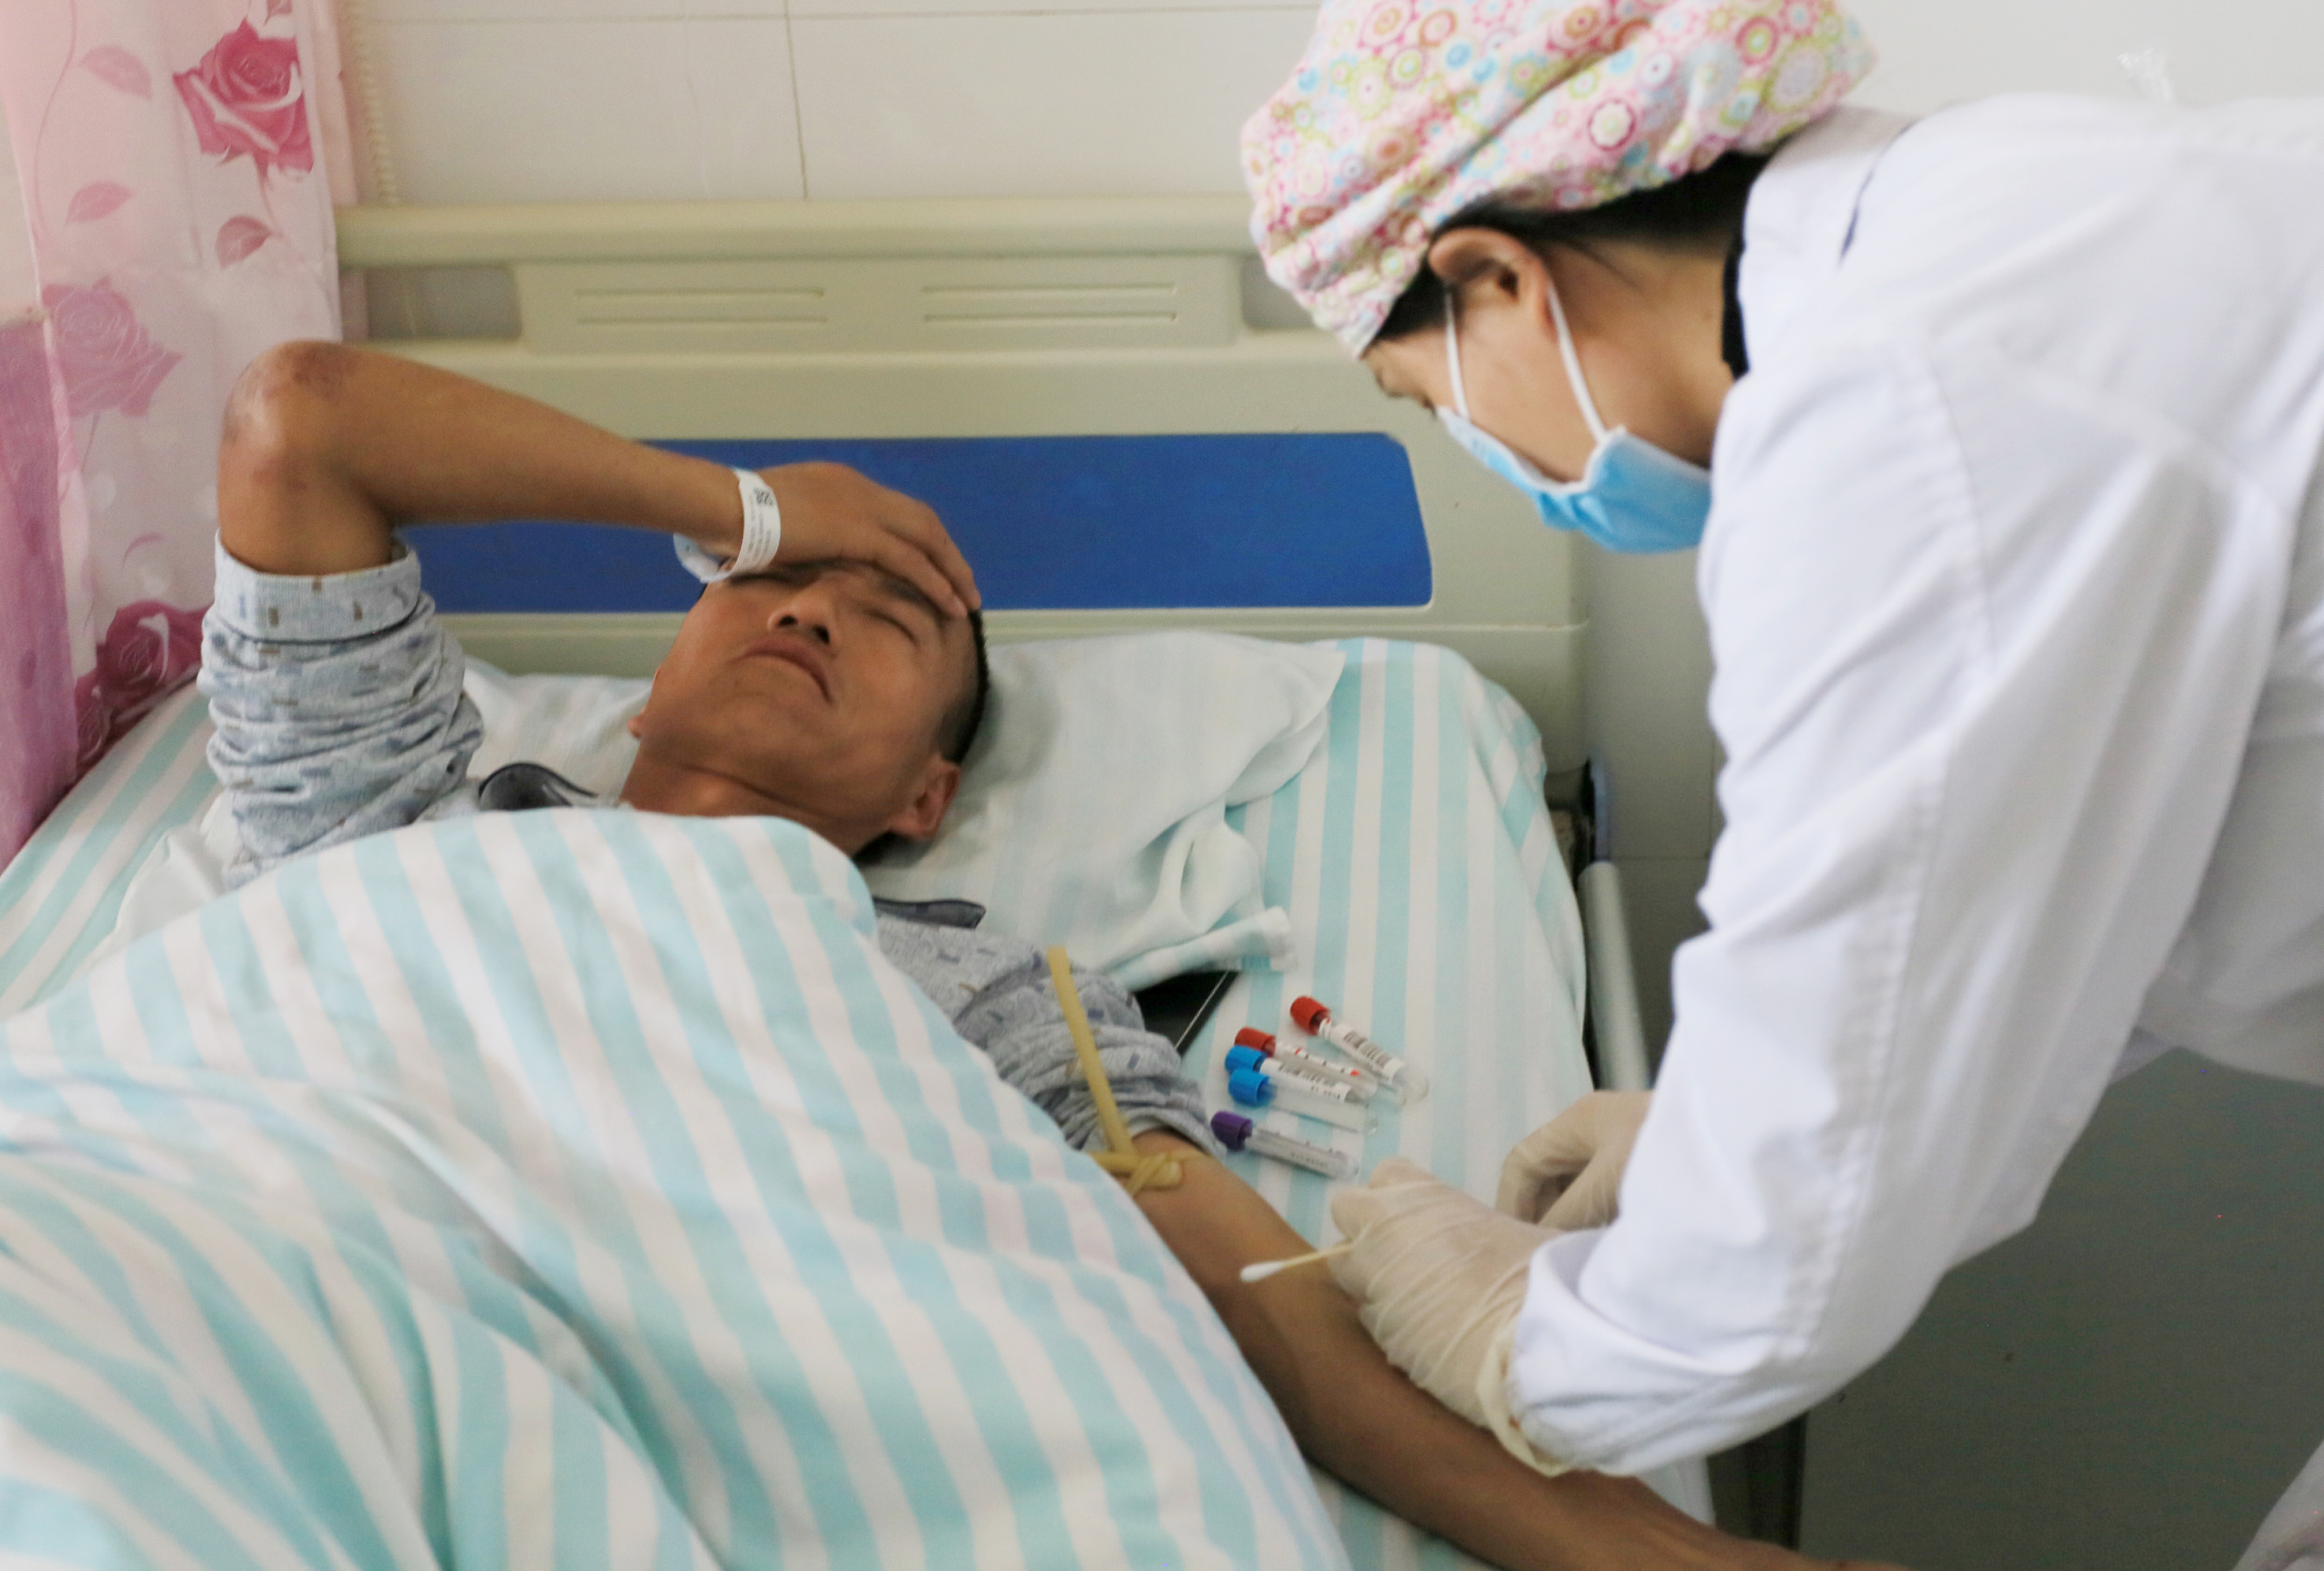 Man receives treatment at a hospital in Jingtai county after extreme cold weather killed participants of an 100-km ultramarathon race in Baiyin